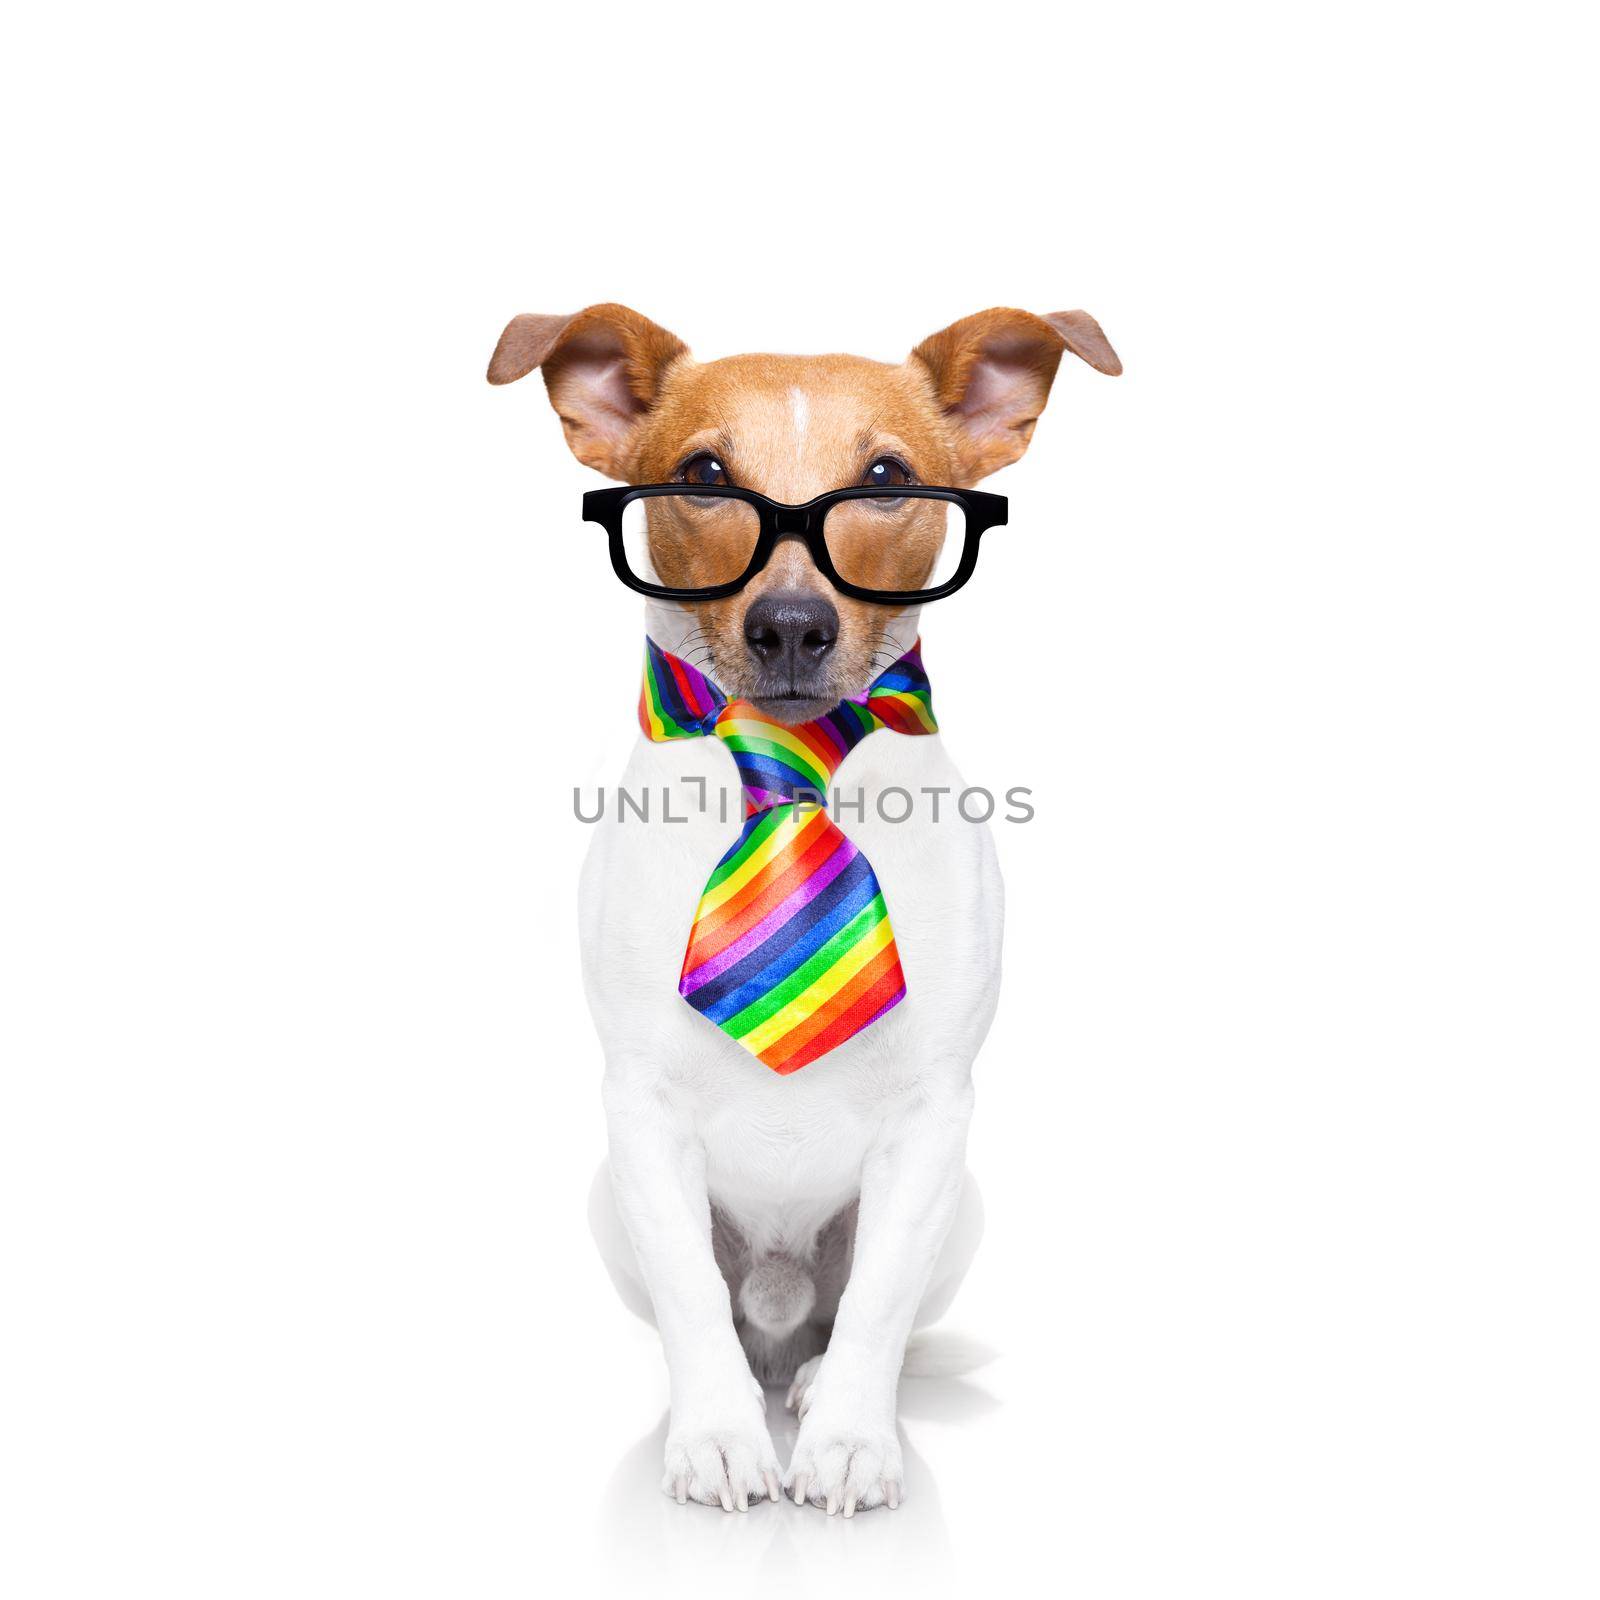 crazy funny gay dog proud of human rights ,sitting and waiting, with rainbow flag tie  , isolated on white background